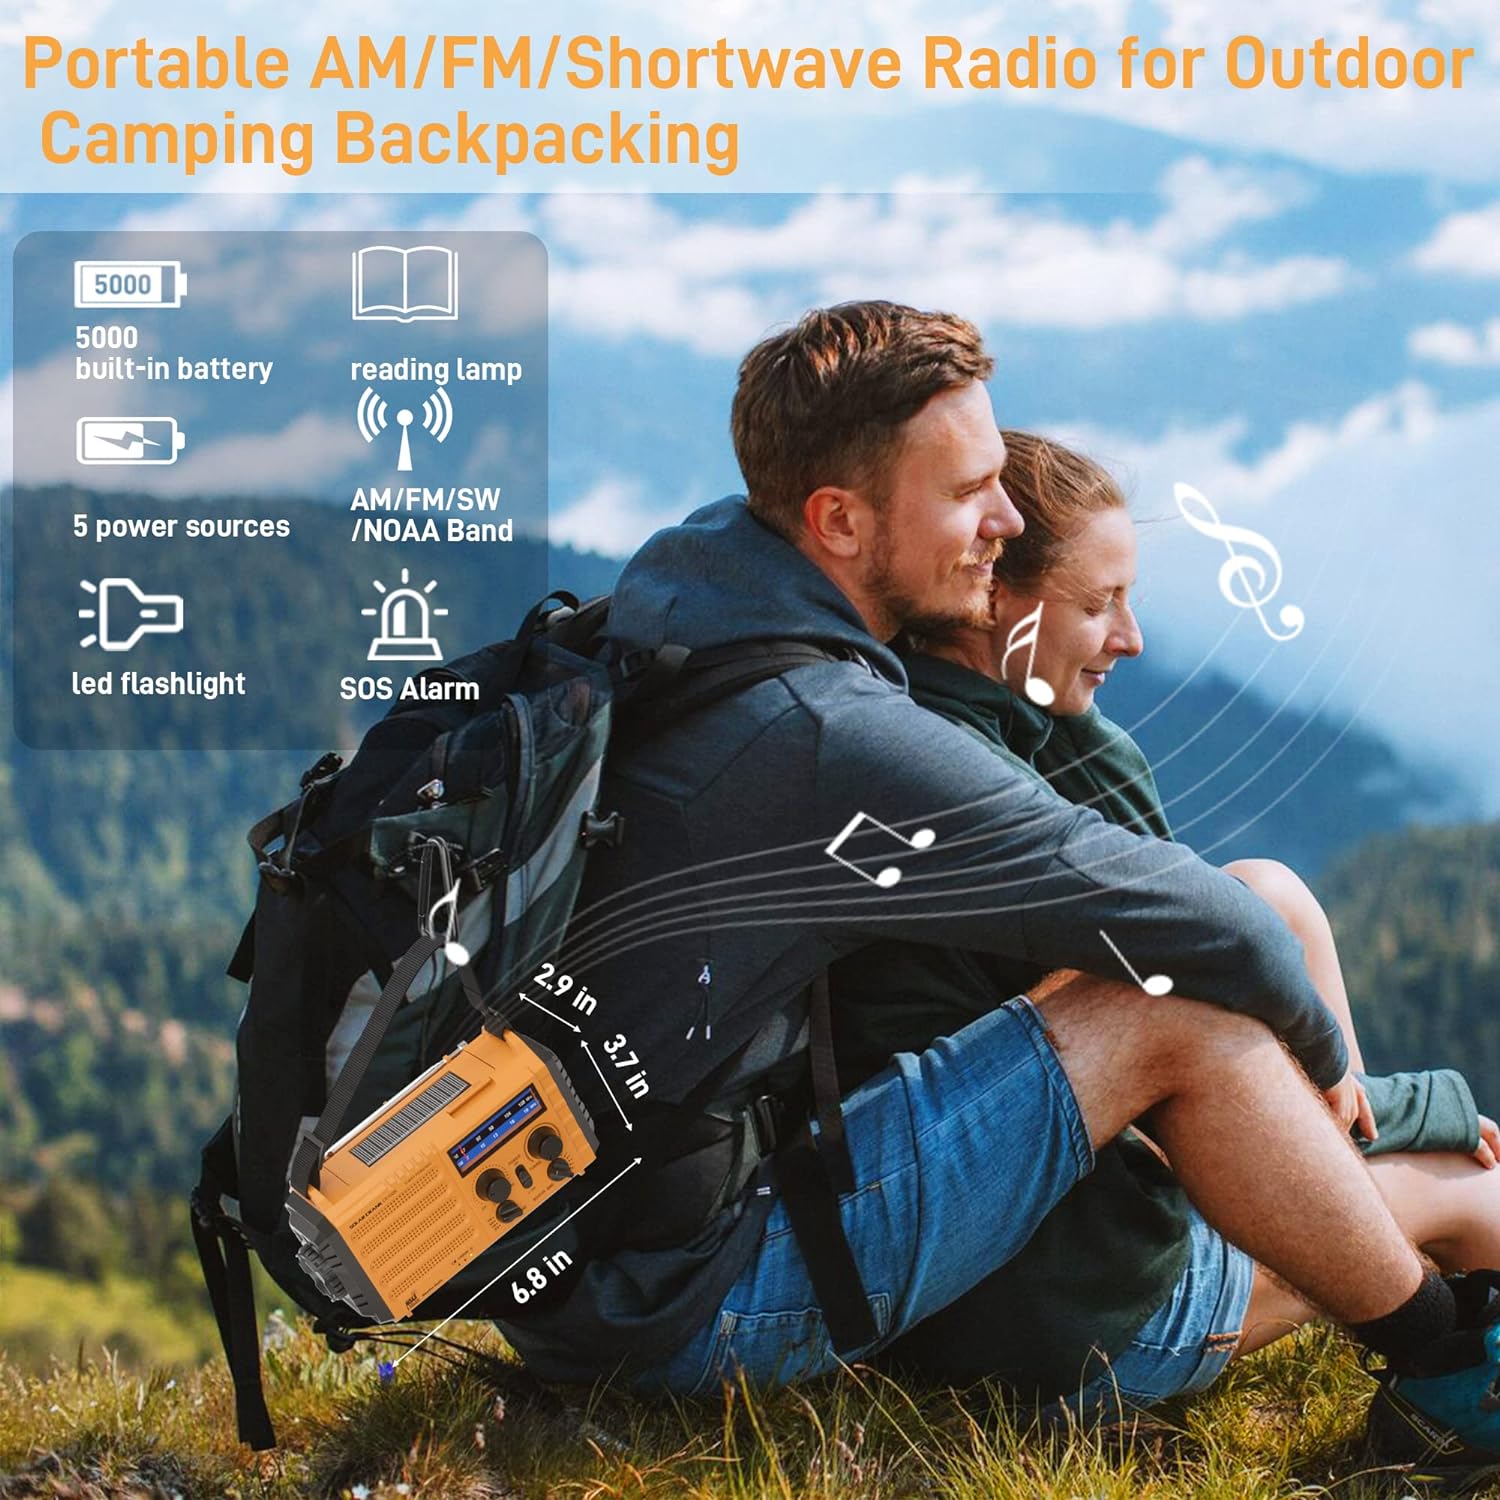 Emergency Radio with NOAA Weather Alert, Portable Solar Hand Crank AM/FM Radio for Survival,Rechargeable Battery Powered Radio,Usb Charger,Flashlight,Reading Lamp,For Home Outdoor